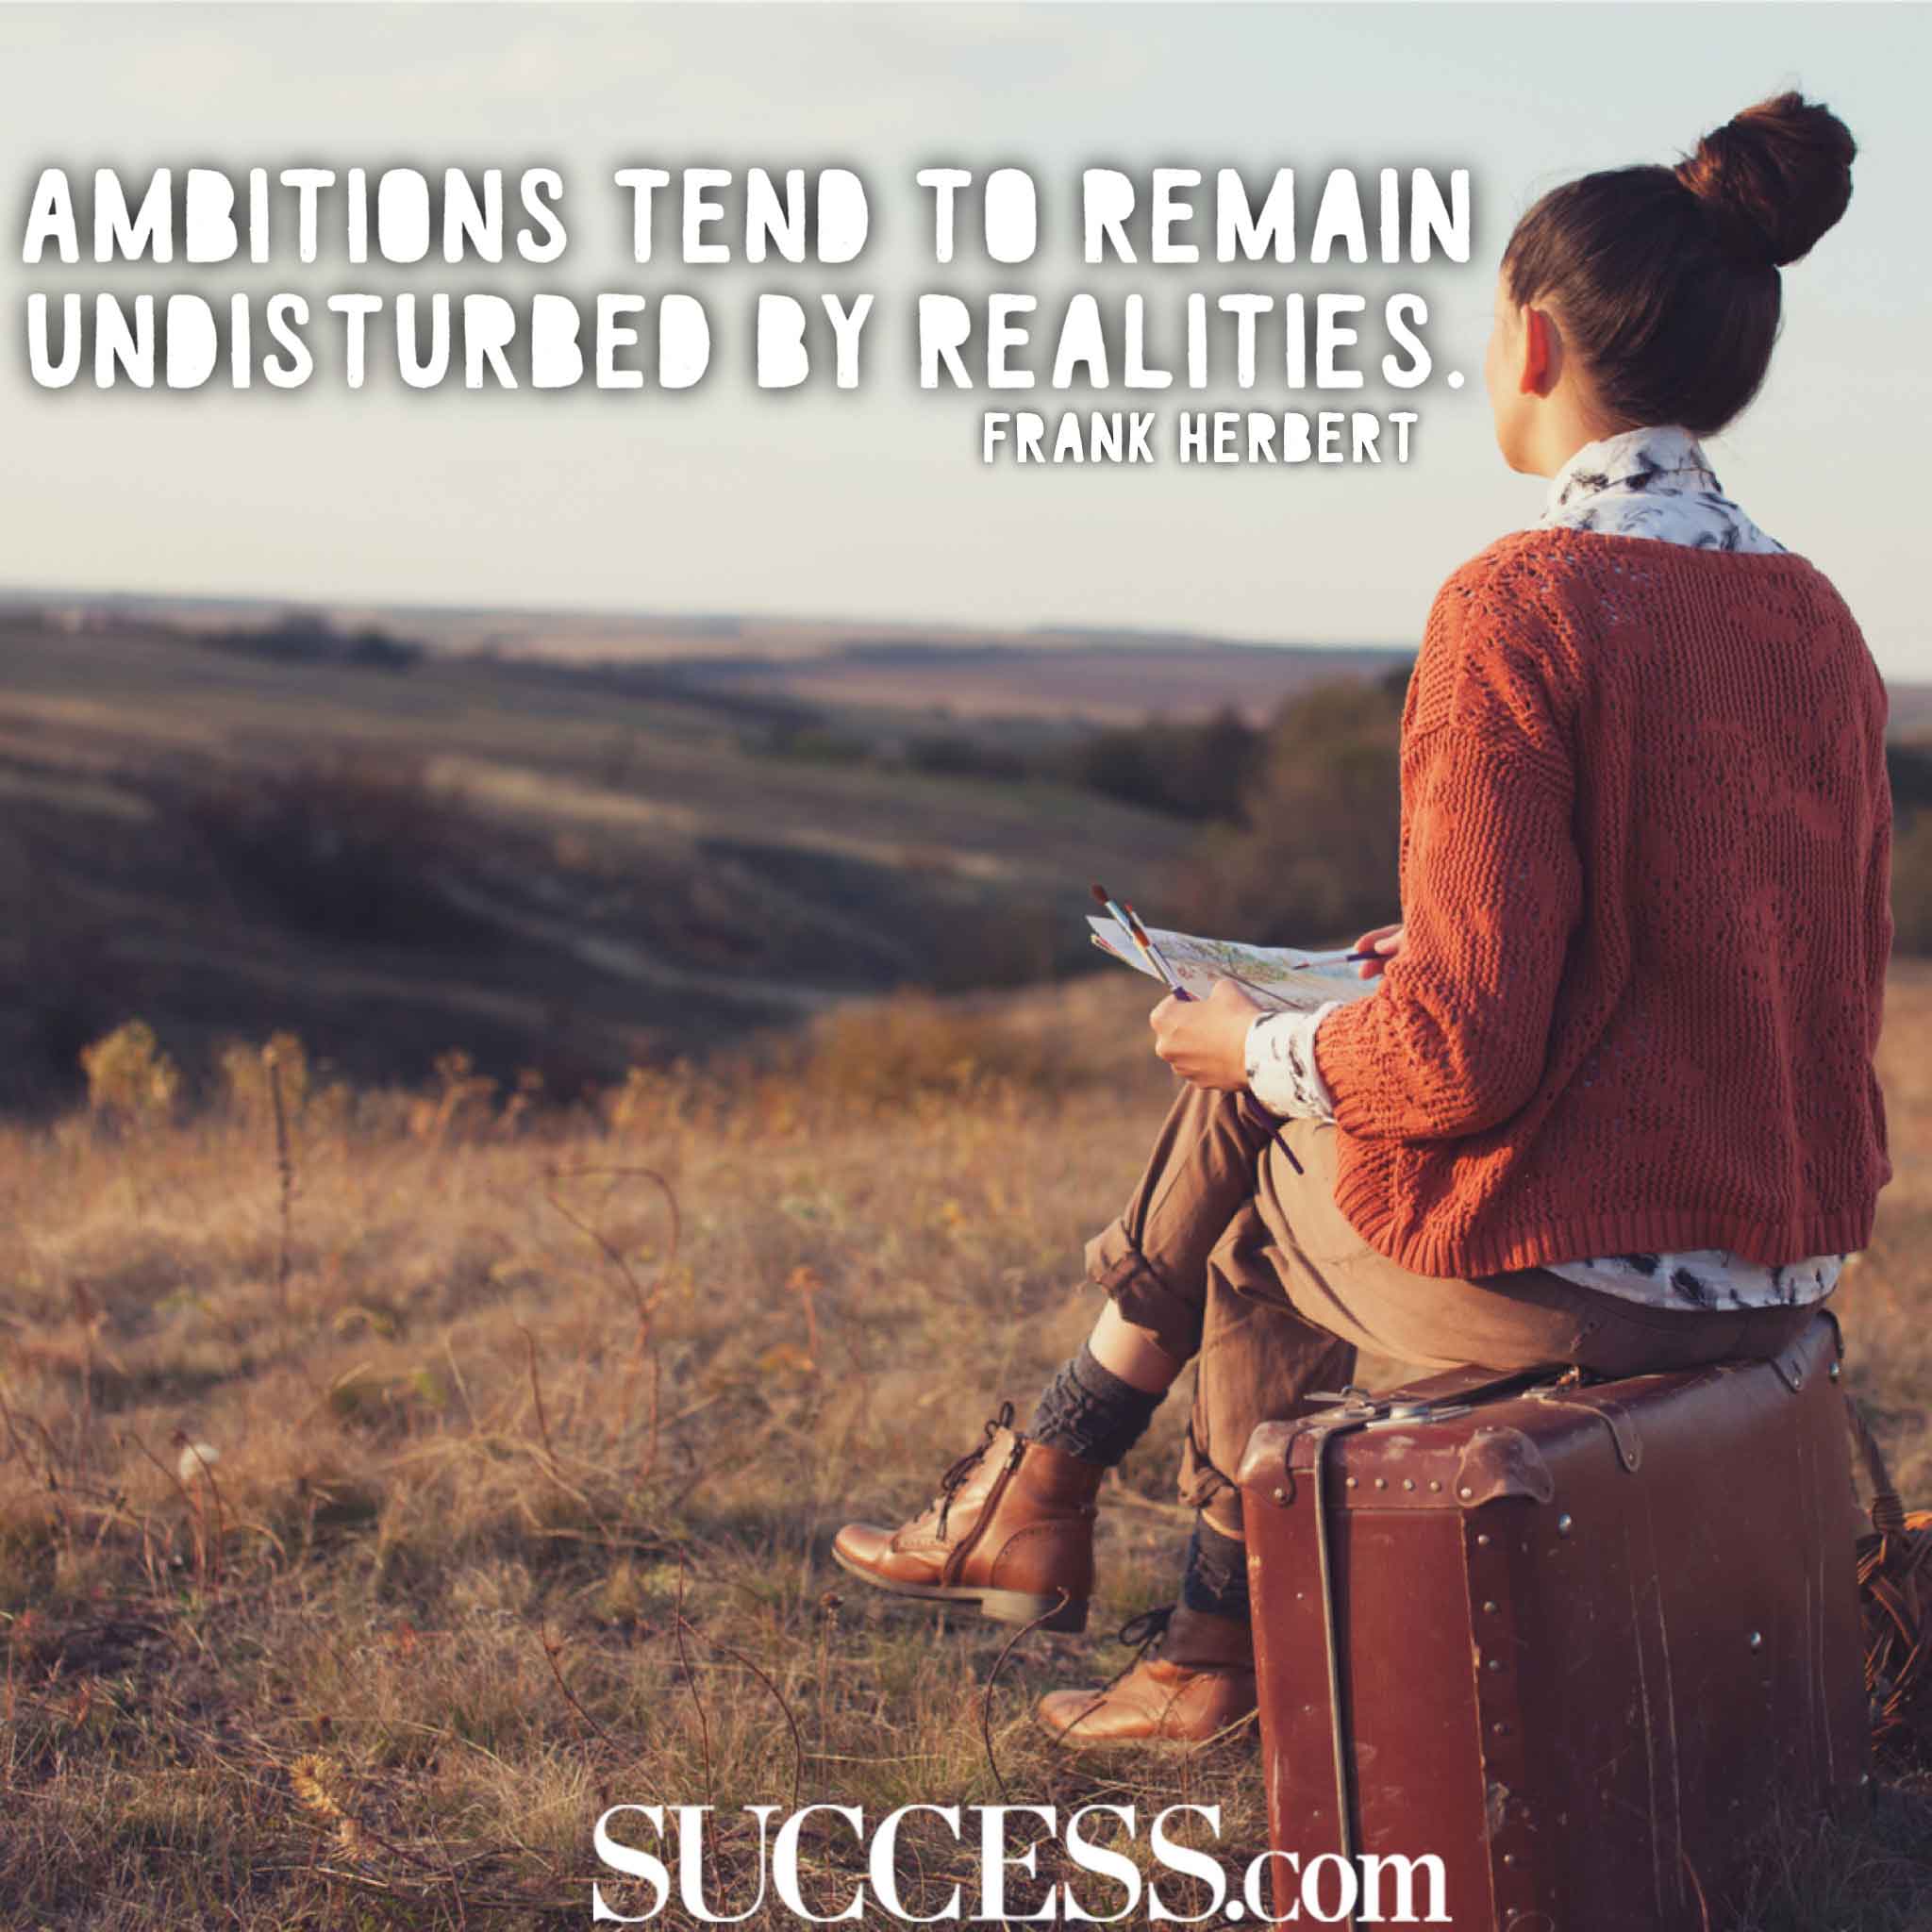 13 Motivational Quotes About the Power of Ambition